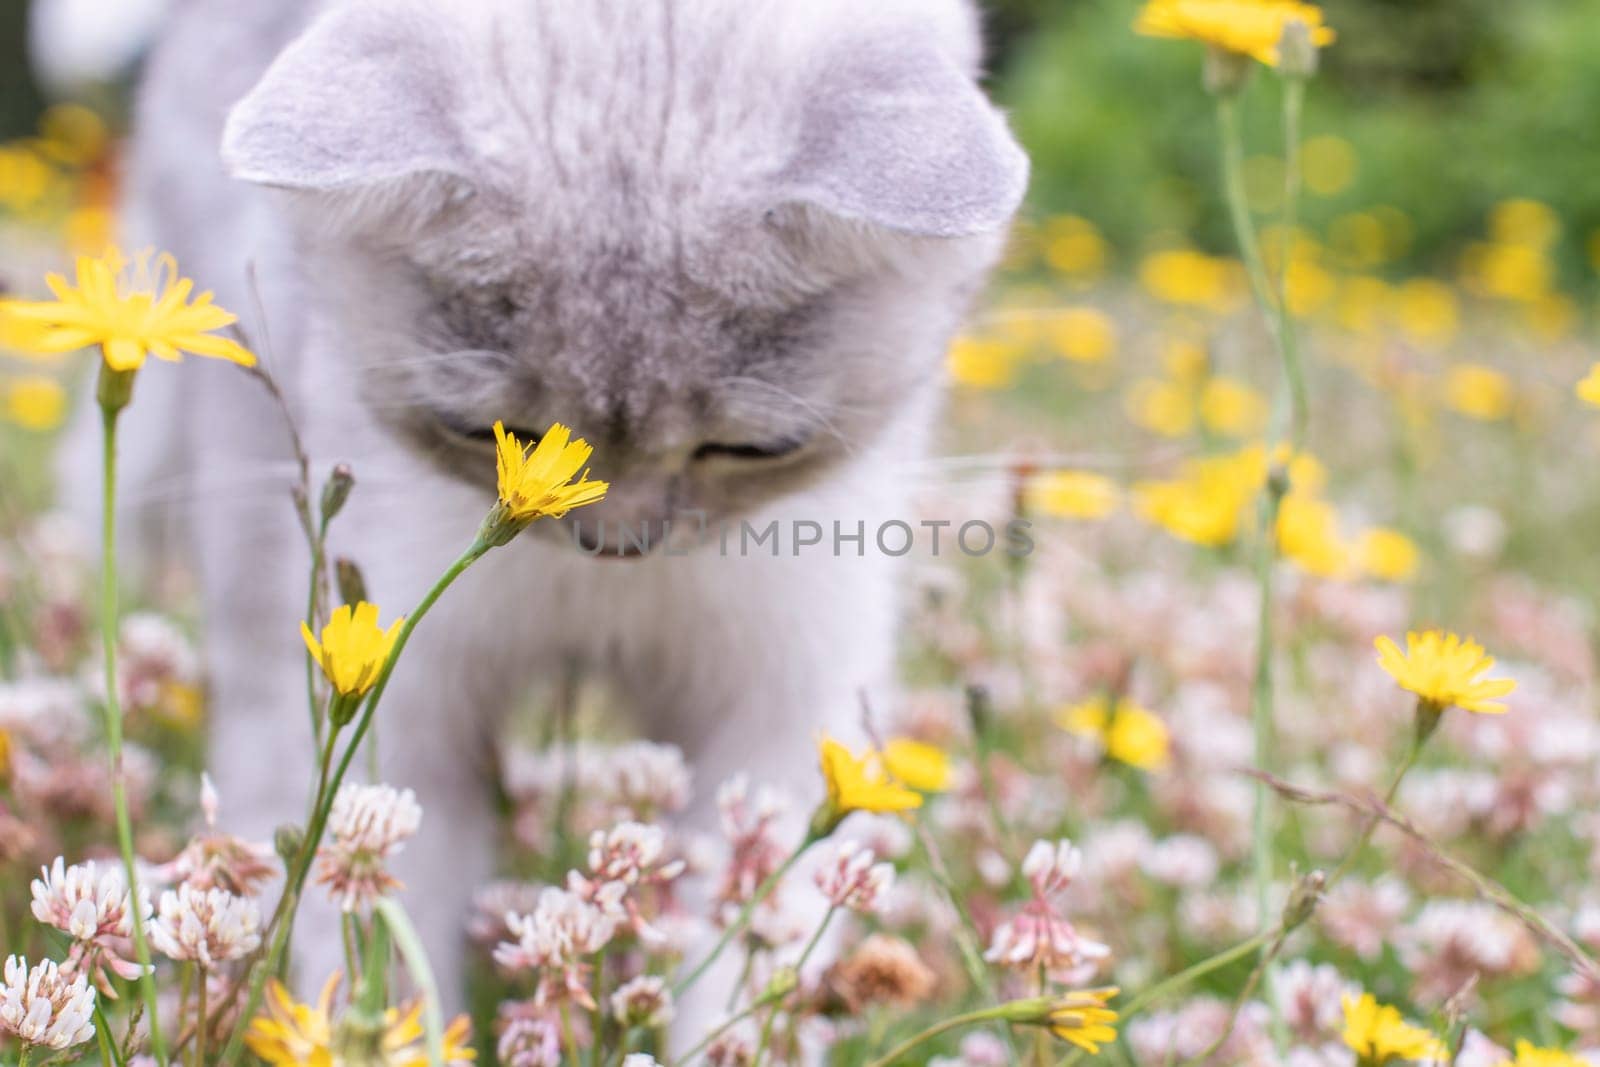 small white kitten sniffing flowers on a green summer lawn, looking with curiosity at something in the grass, selective focus, High quality photo